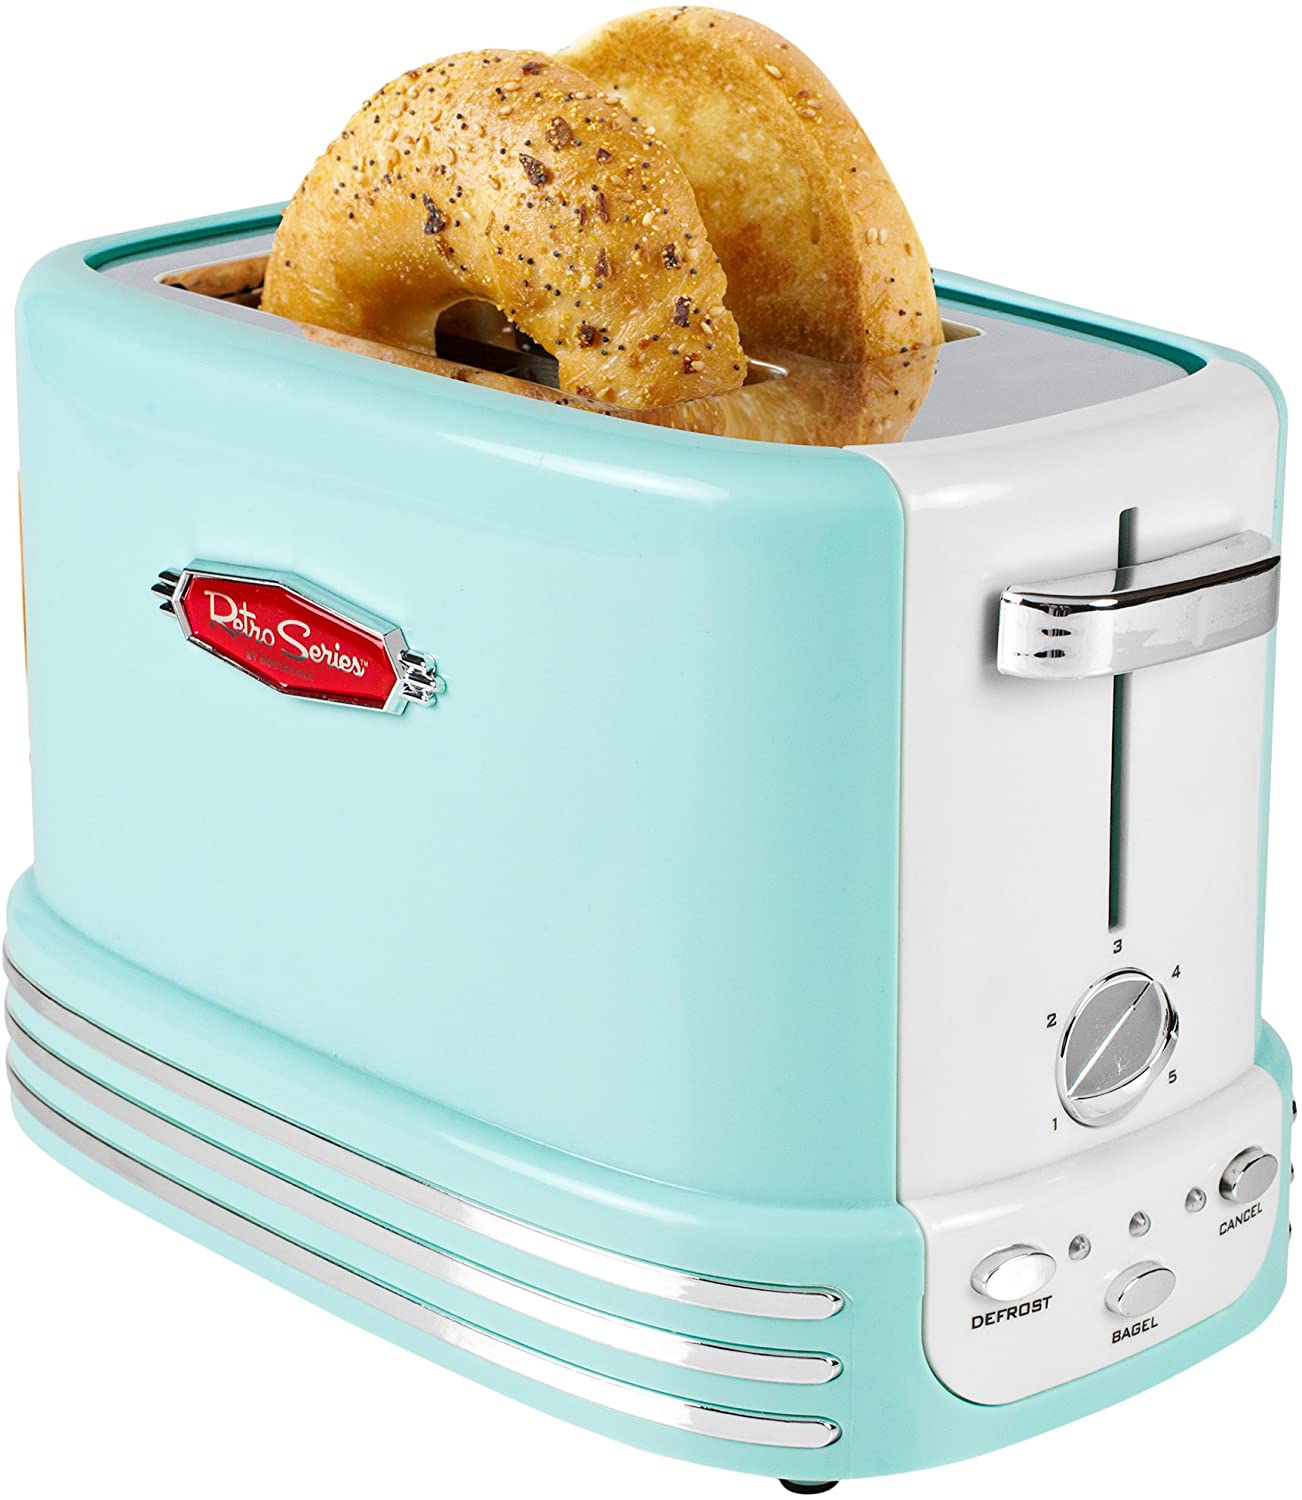 Nostalgia RTOS200AQ New and Improved Retro Wide 2-Slice Toaster Perfect For Bread, English Muffins, Bagels, 5 Browning Levels, With Crumb Tray & Cord Storage – Aqua